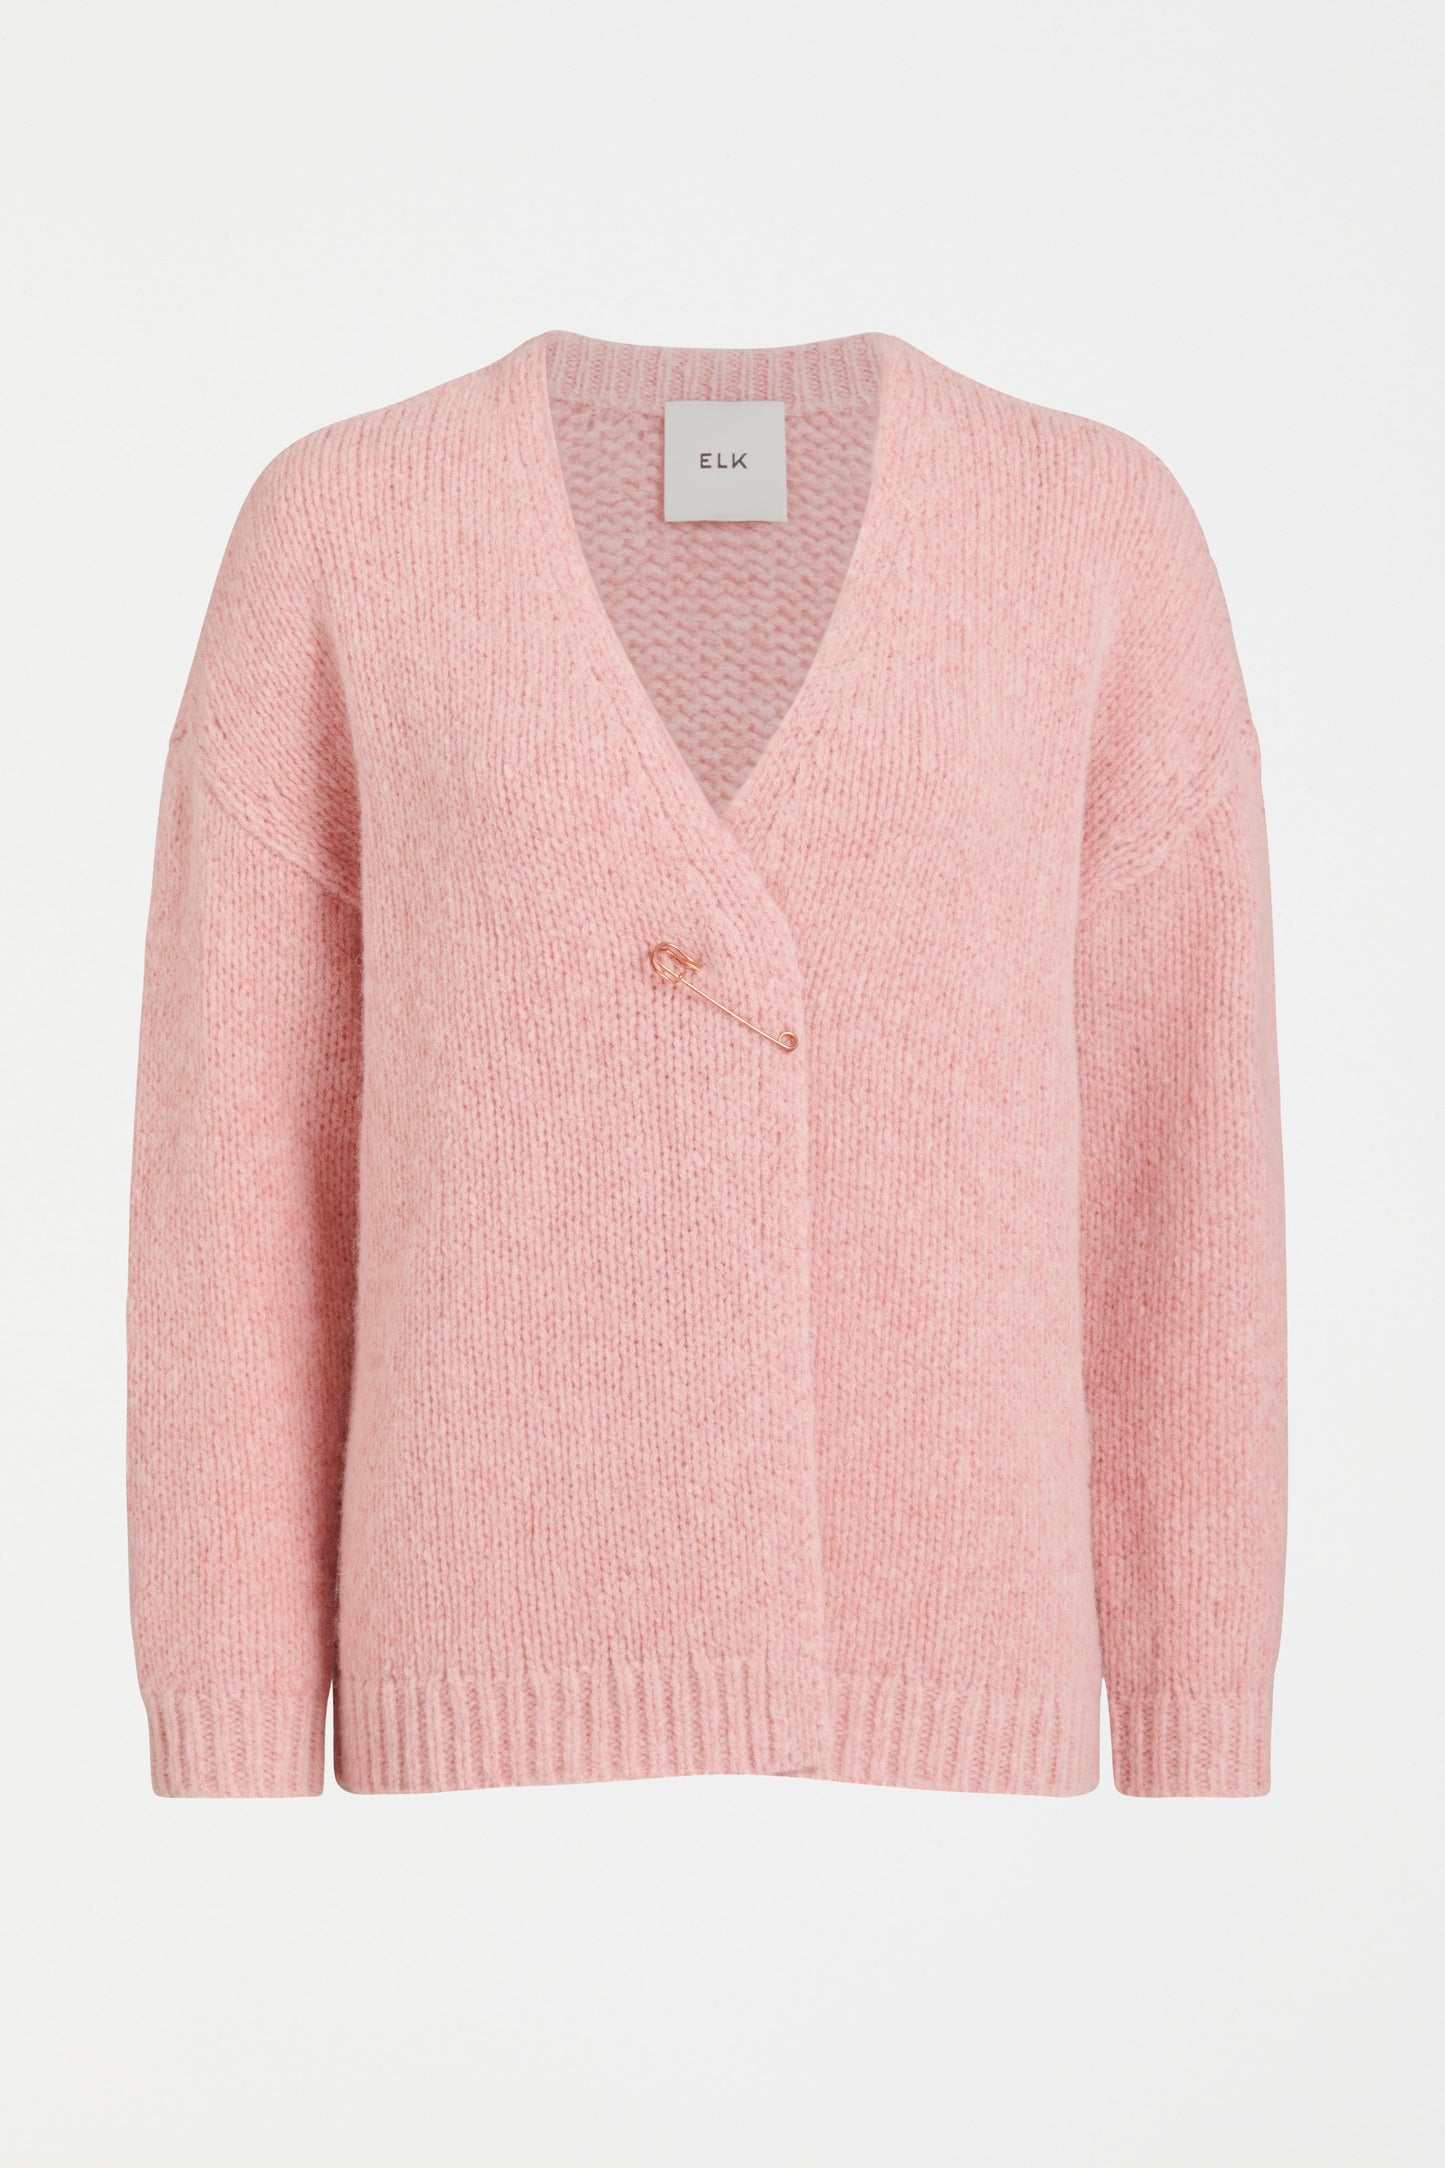 Alli Alpaca Merino Fluffy Wrap Cardigan with Large Safety Pin Closure Front | PINK SALT